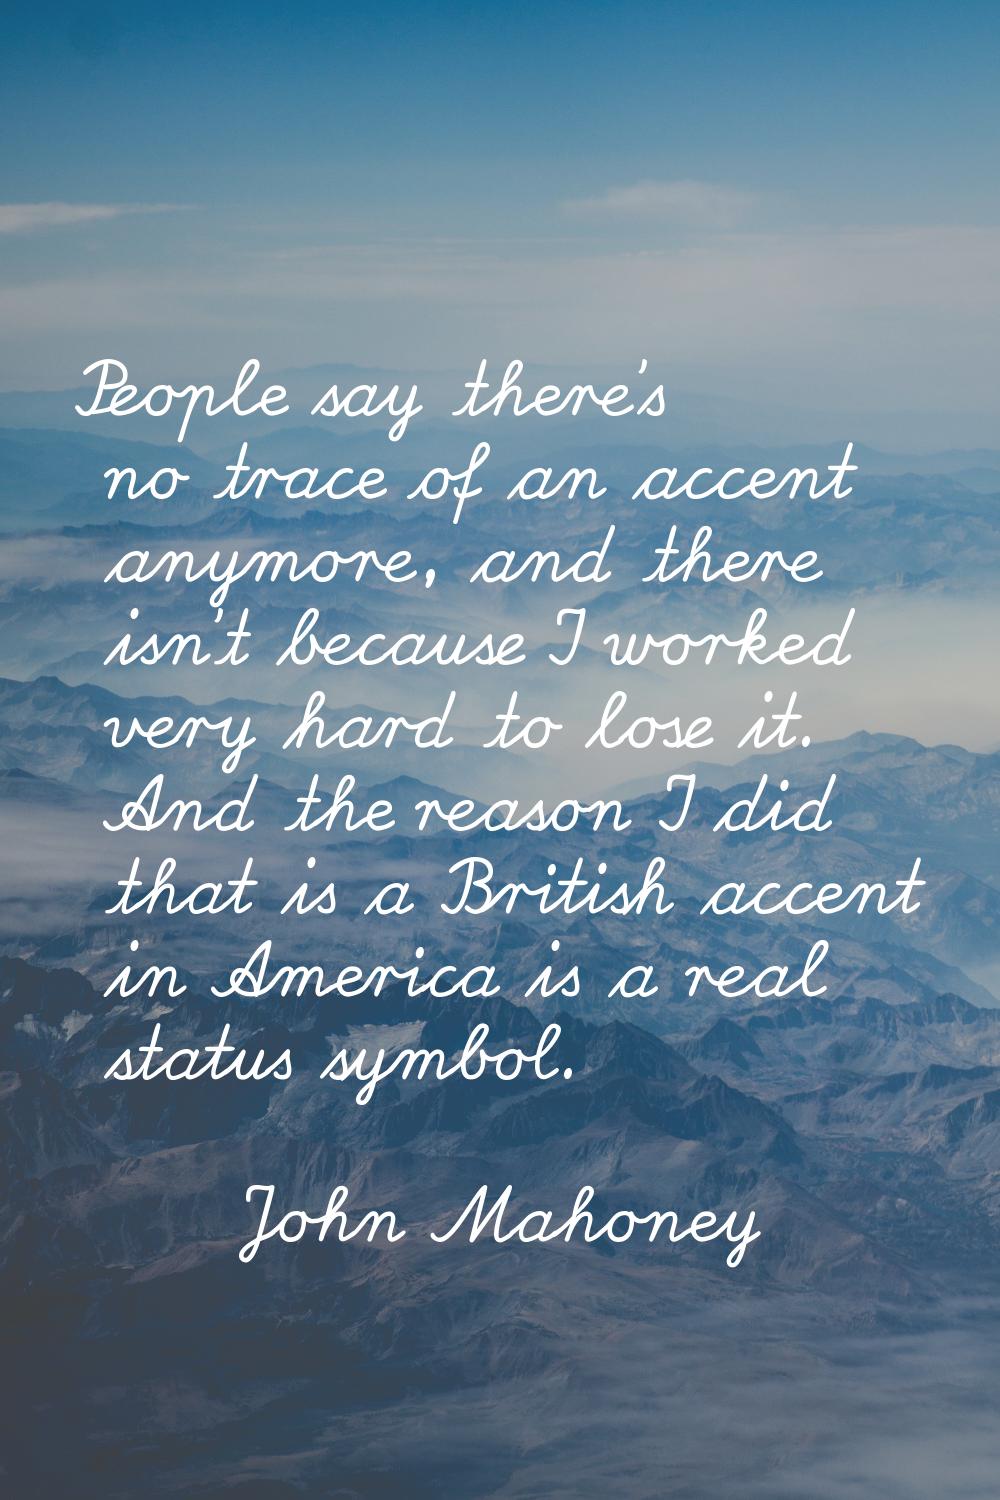 People say there's no trace of an accent anymore, and there isn't because I worked very hard to los